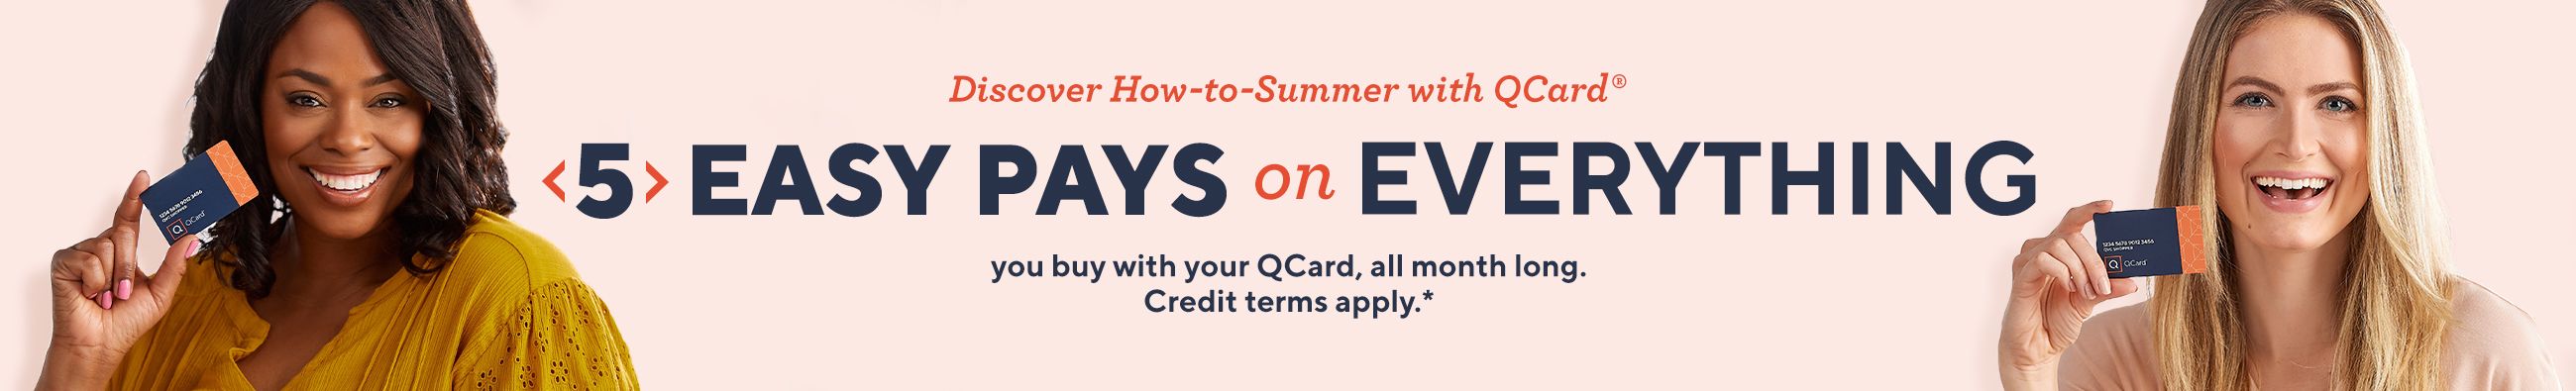 Discover How-to-Summer with QCard®: 5 Easy Pays on Everything you buy with your QCard, all month long. Credit terms apply.*